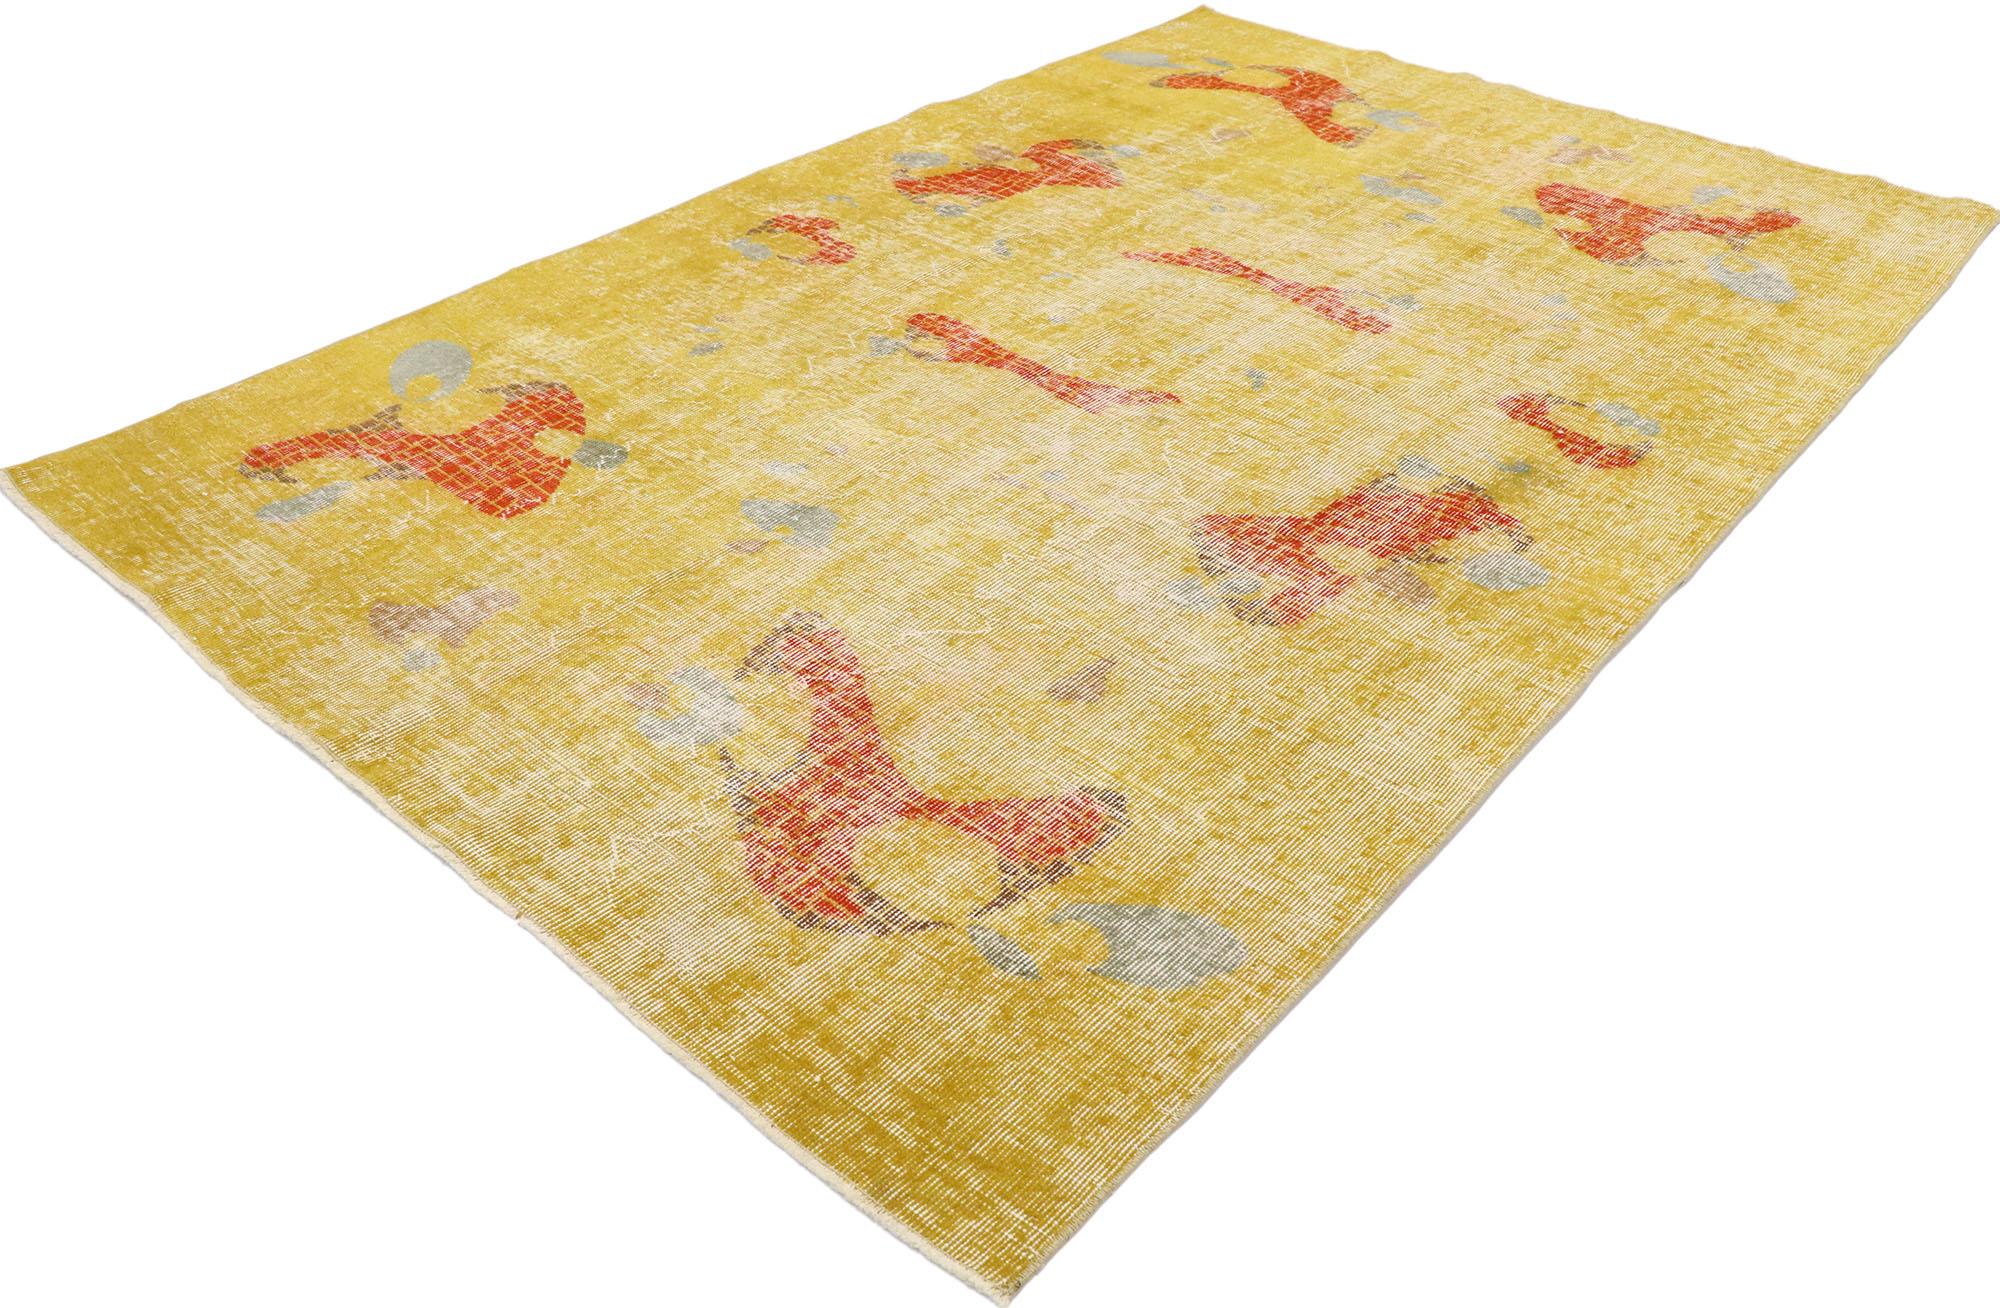 53318, Zeki Muren distressed vintage Turkish Sivas rug with Abstract Expressionist style. With its geometric pattern, bold form and vibrant colors, this hand knotted wool Zeki Muren distressed vintage Turkish Sivas rug beautifully embodies Abstract